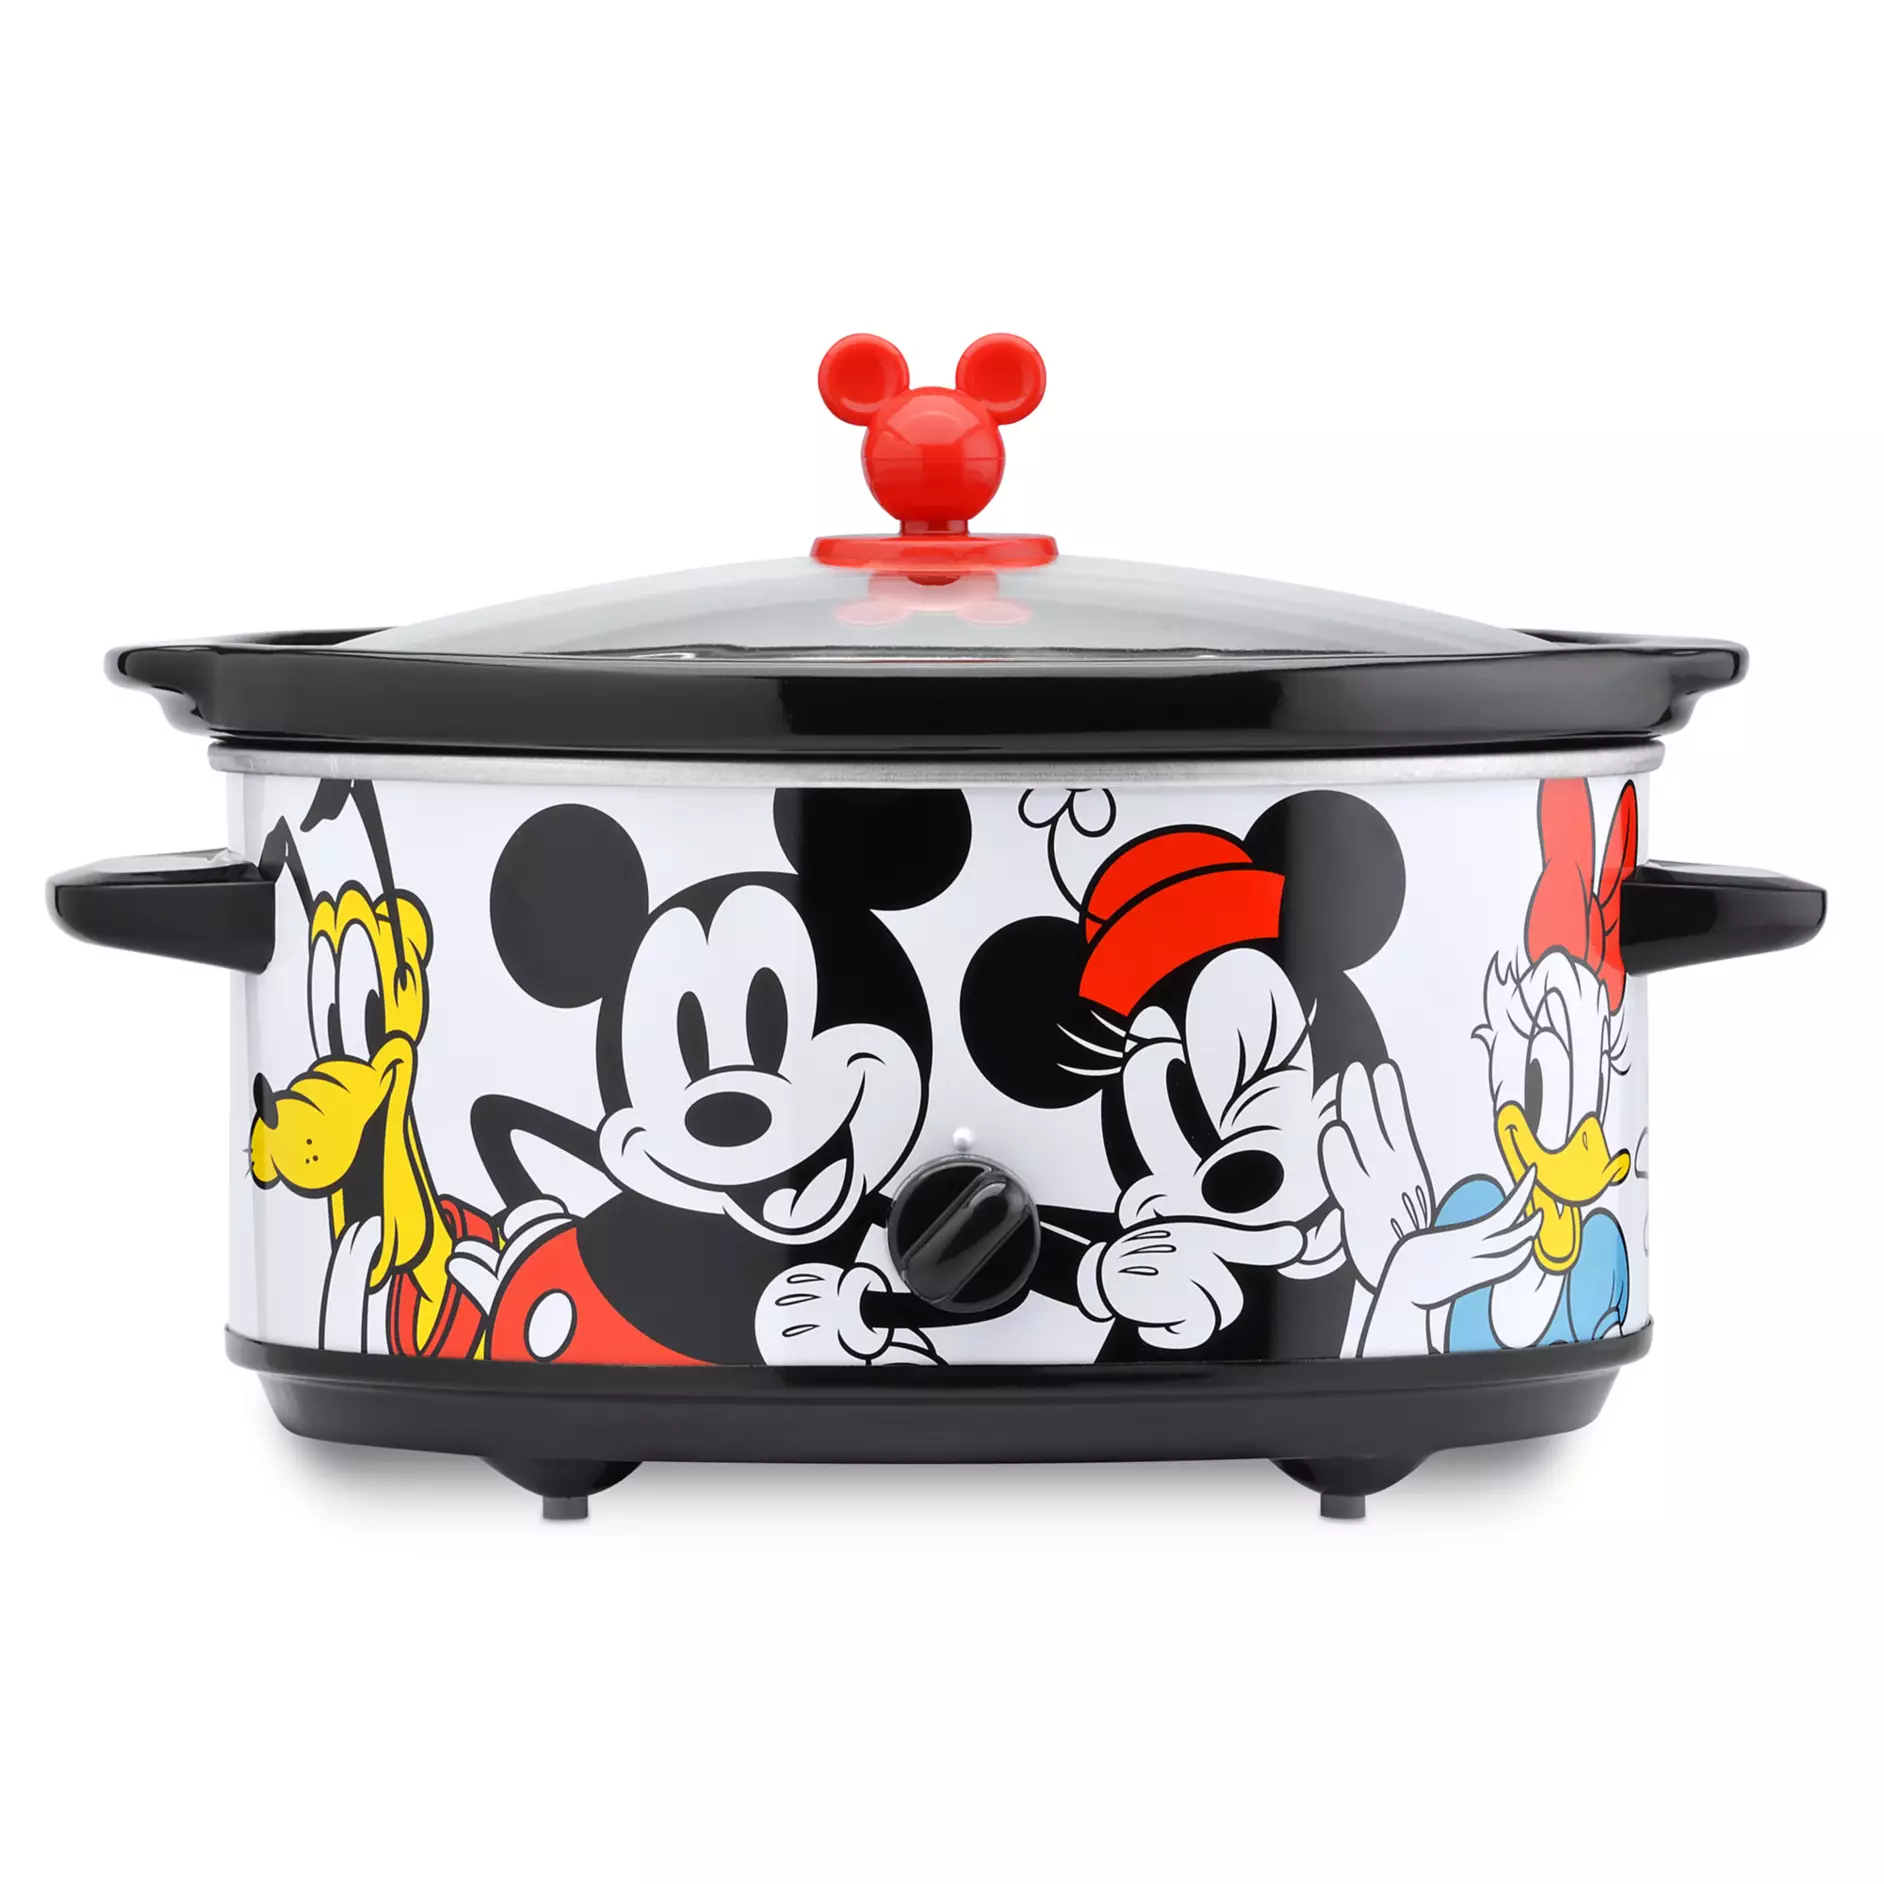 Mickey Mouse and Friends Slow Cooker Official shopDisney